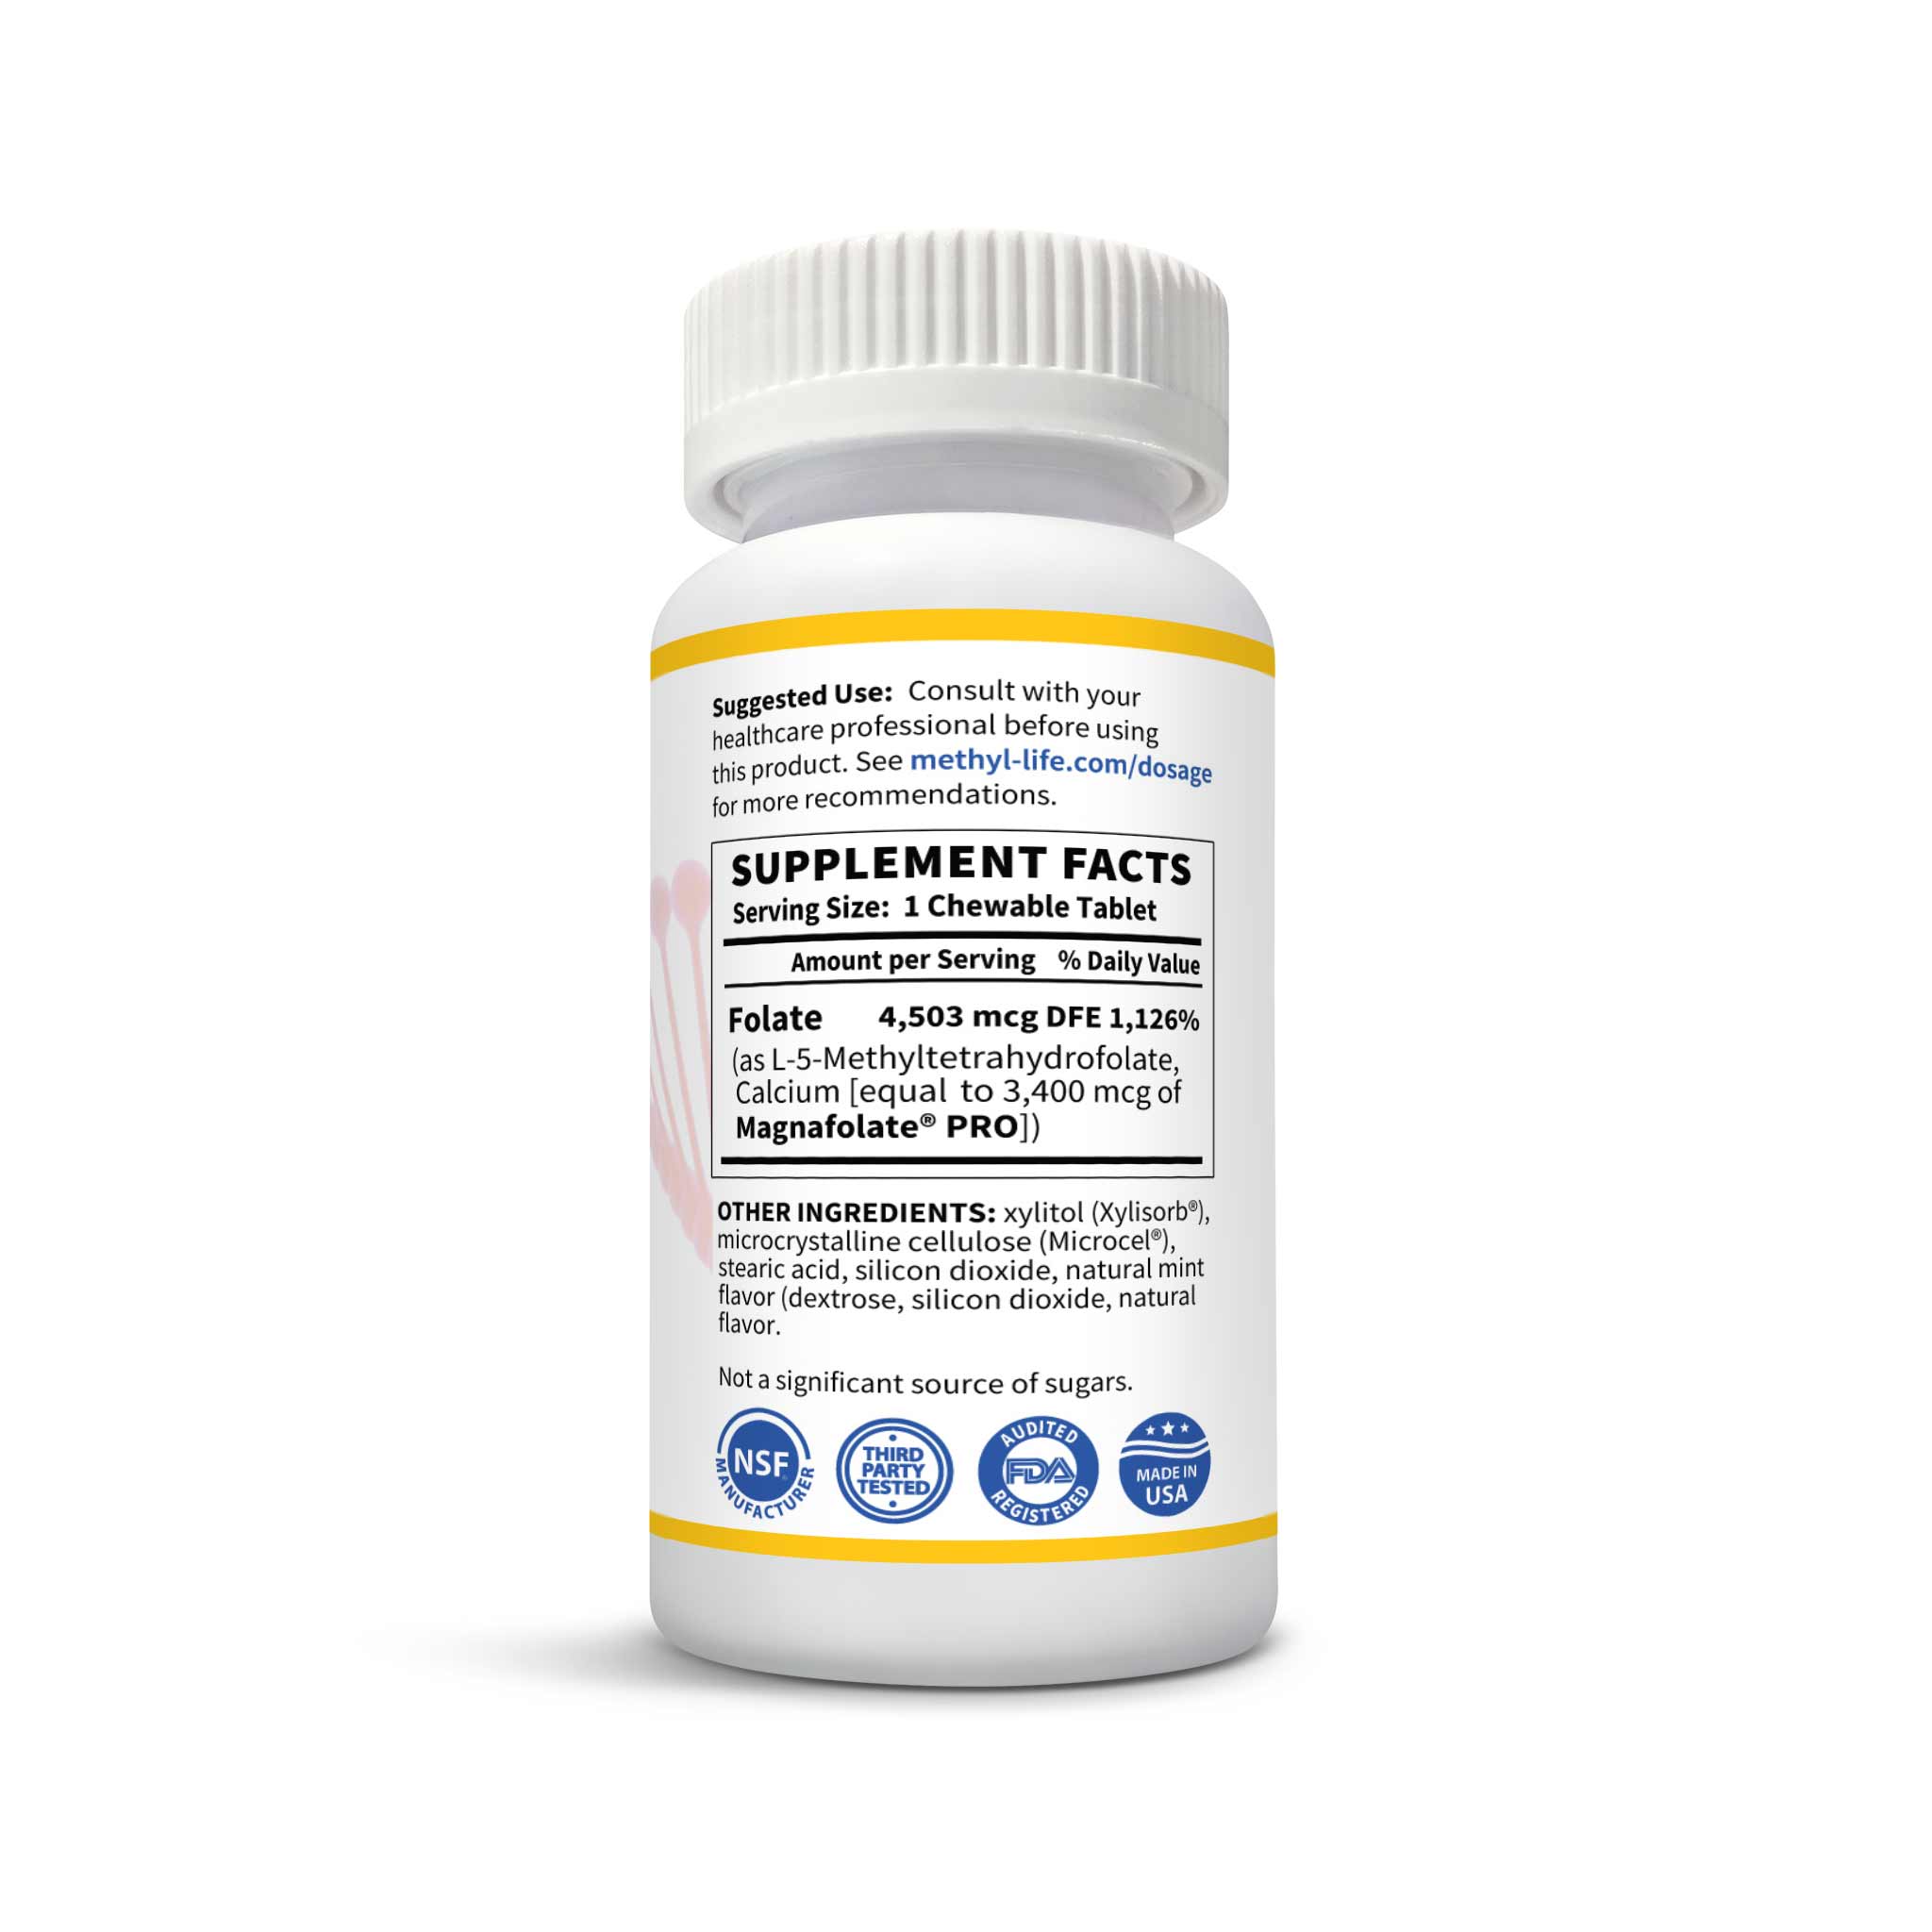 Purest Active L-Methylfolate 2.5 mg - bottle supplement facts - 90 ct chewables - Methyl-Life